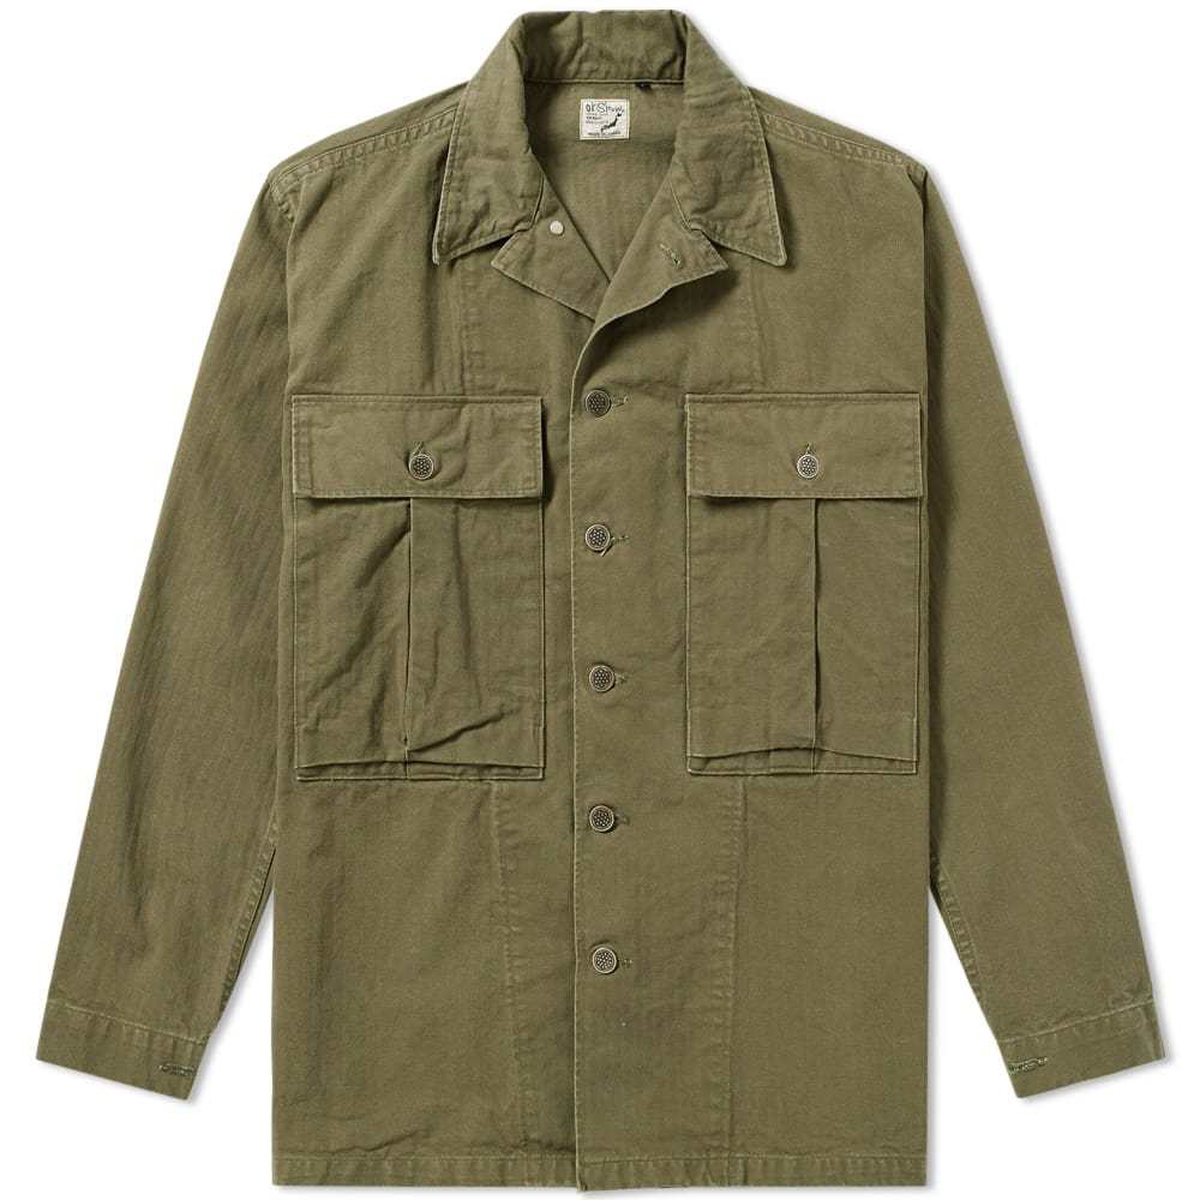 orSlow US Army Jacket Green orSlow